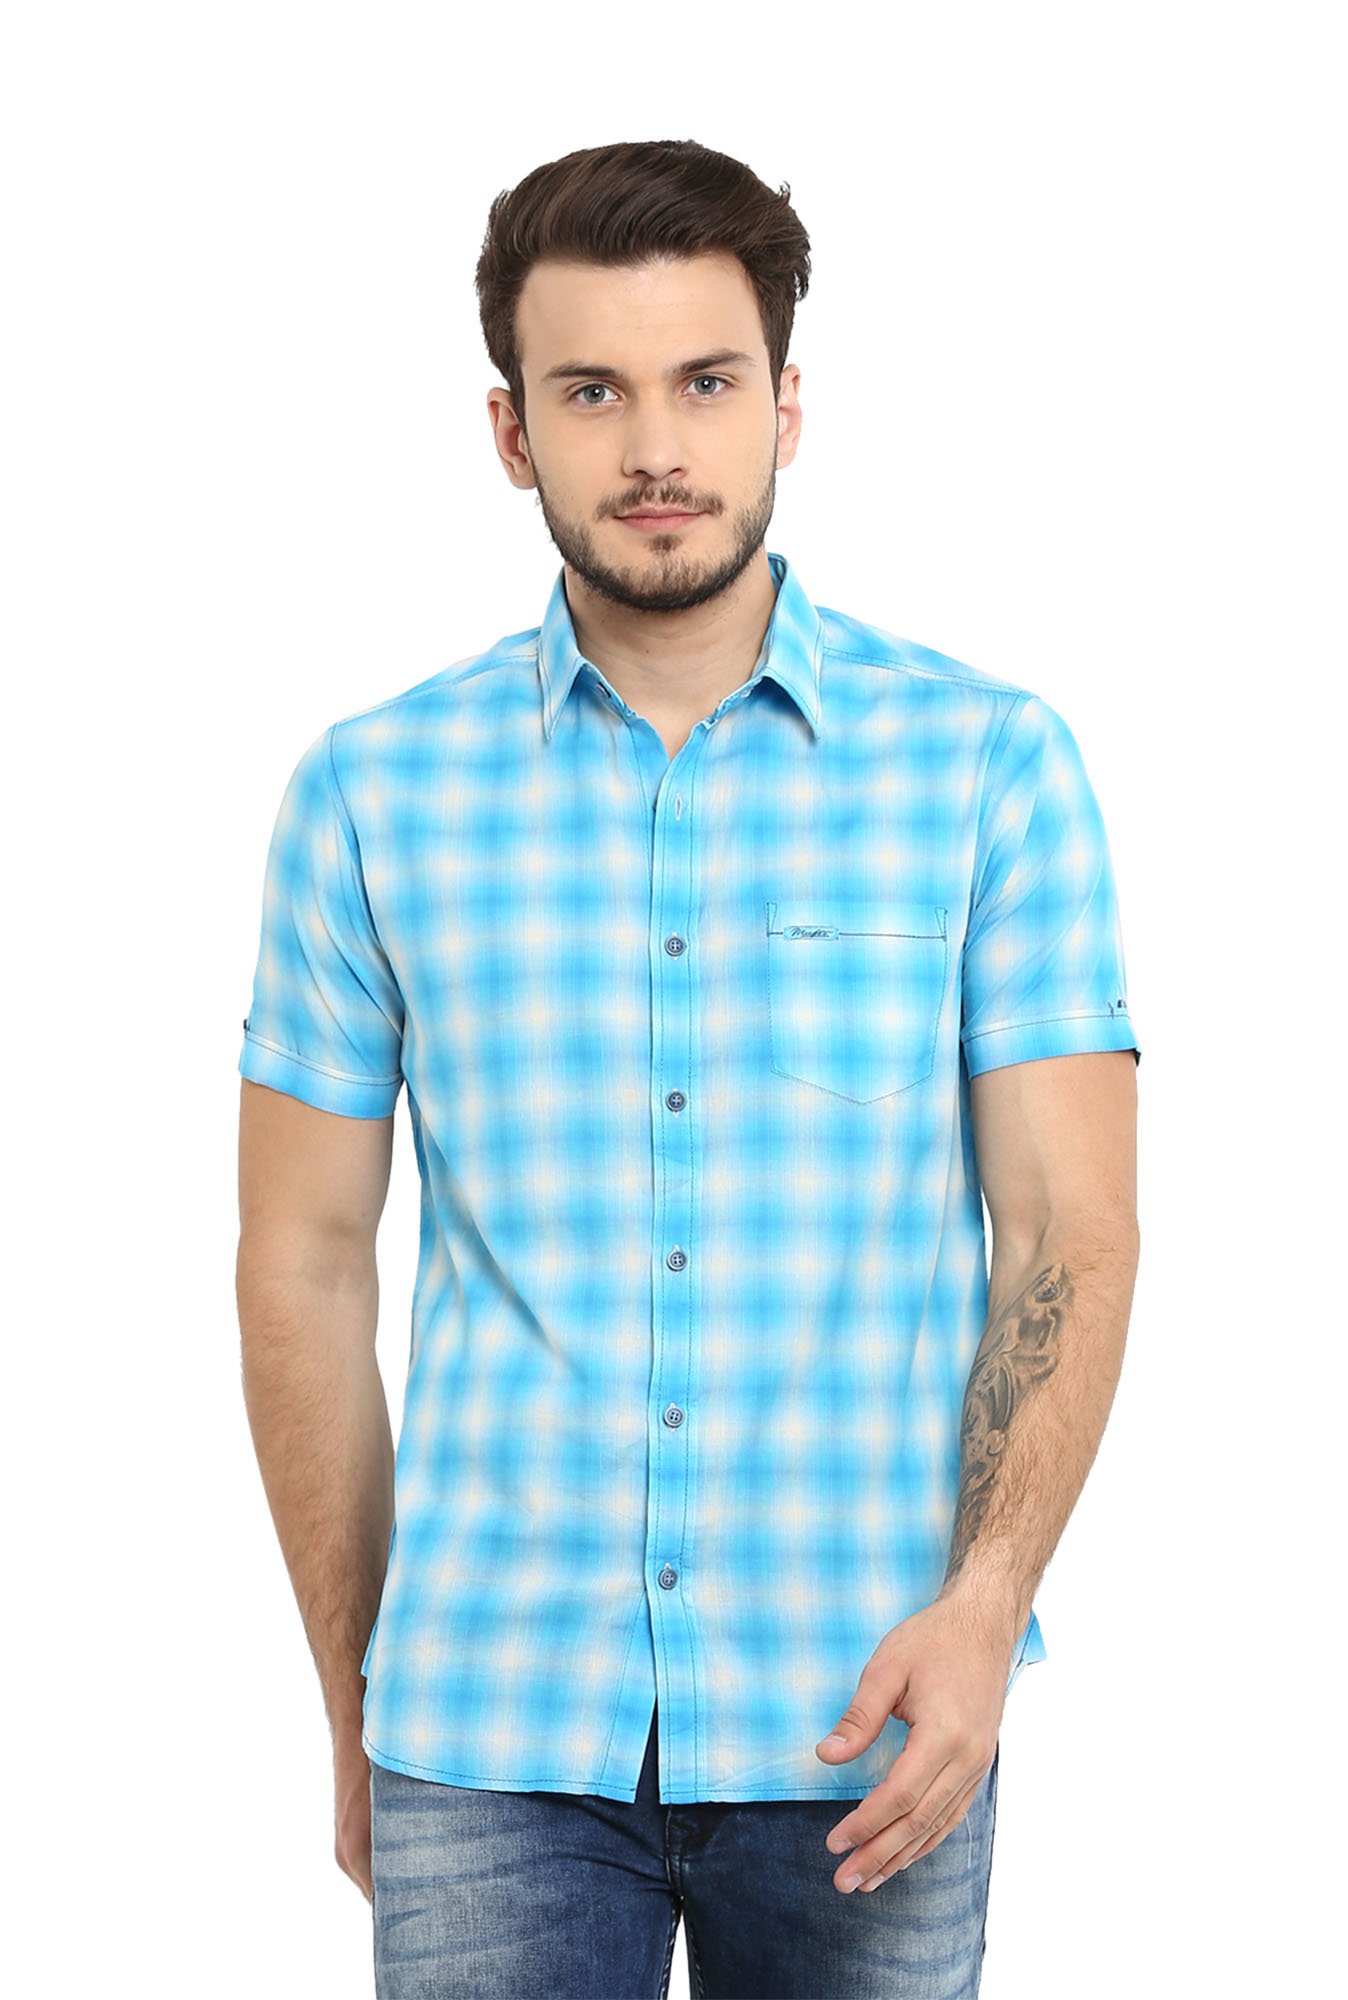 No Fade Mufti Mens Full Sleeve Cotton Shirts at Best Price in Delhi |  Gridinfi Trade Solutions